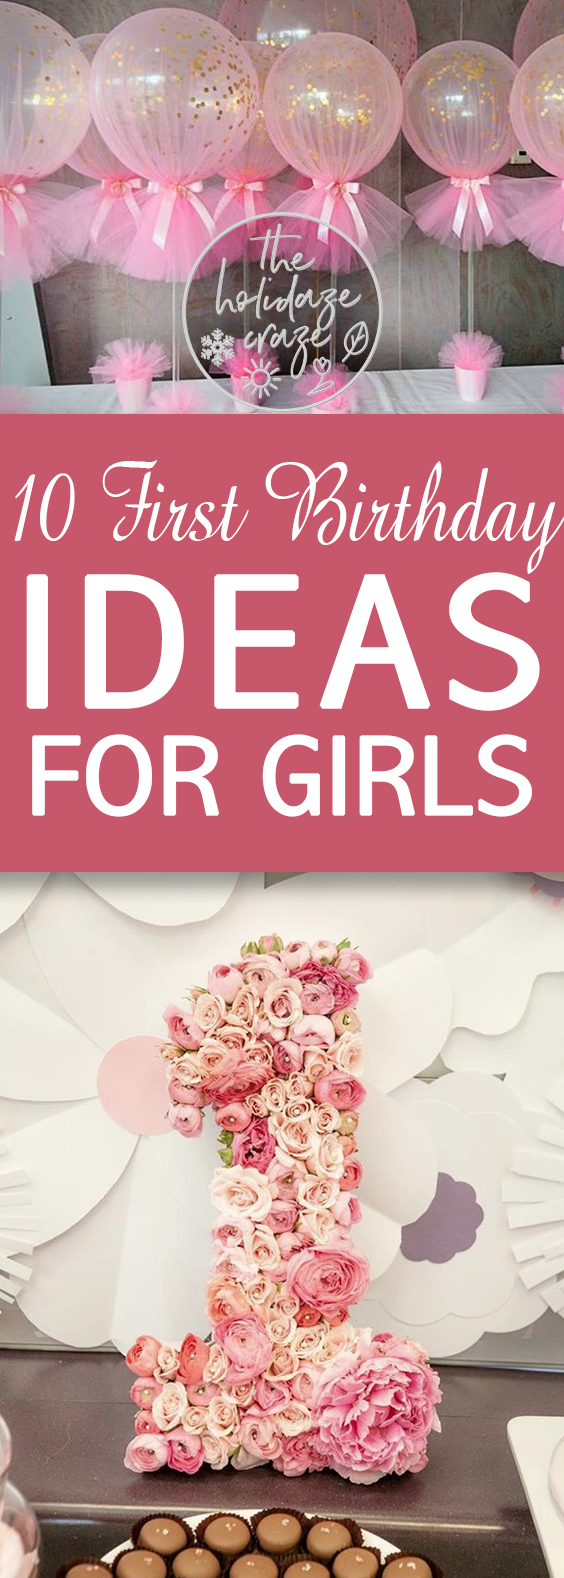 10 First Birthday Ideas for Girls * The Holidaze Craze